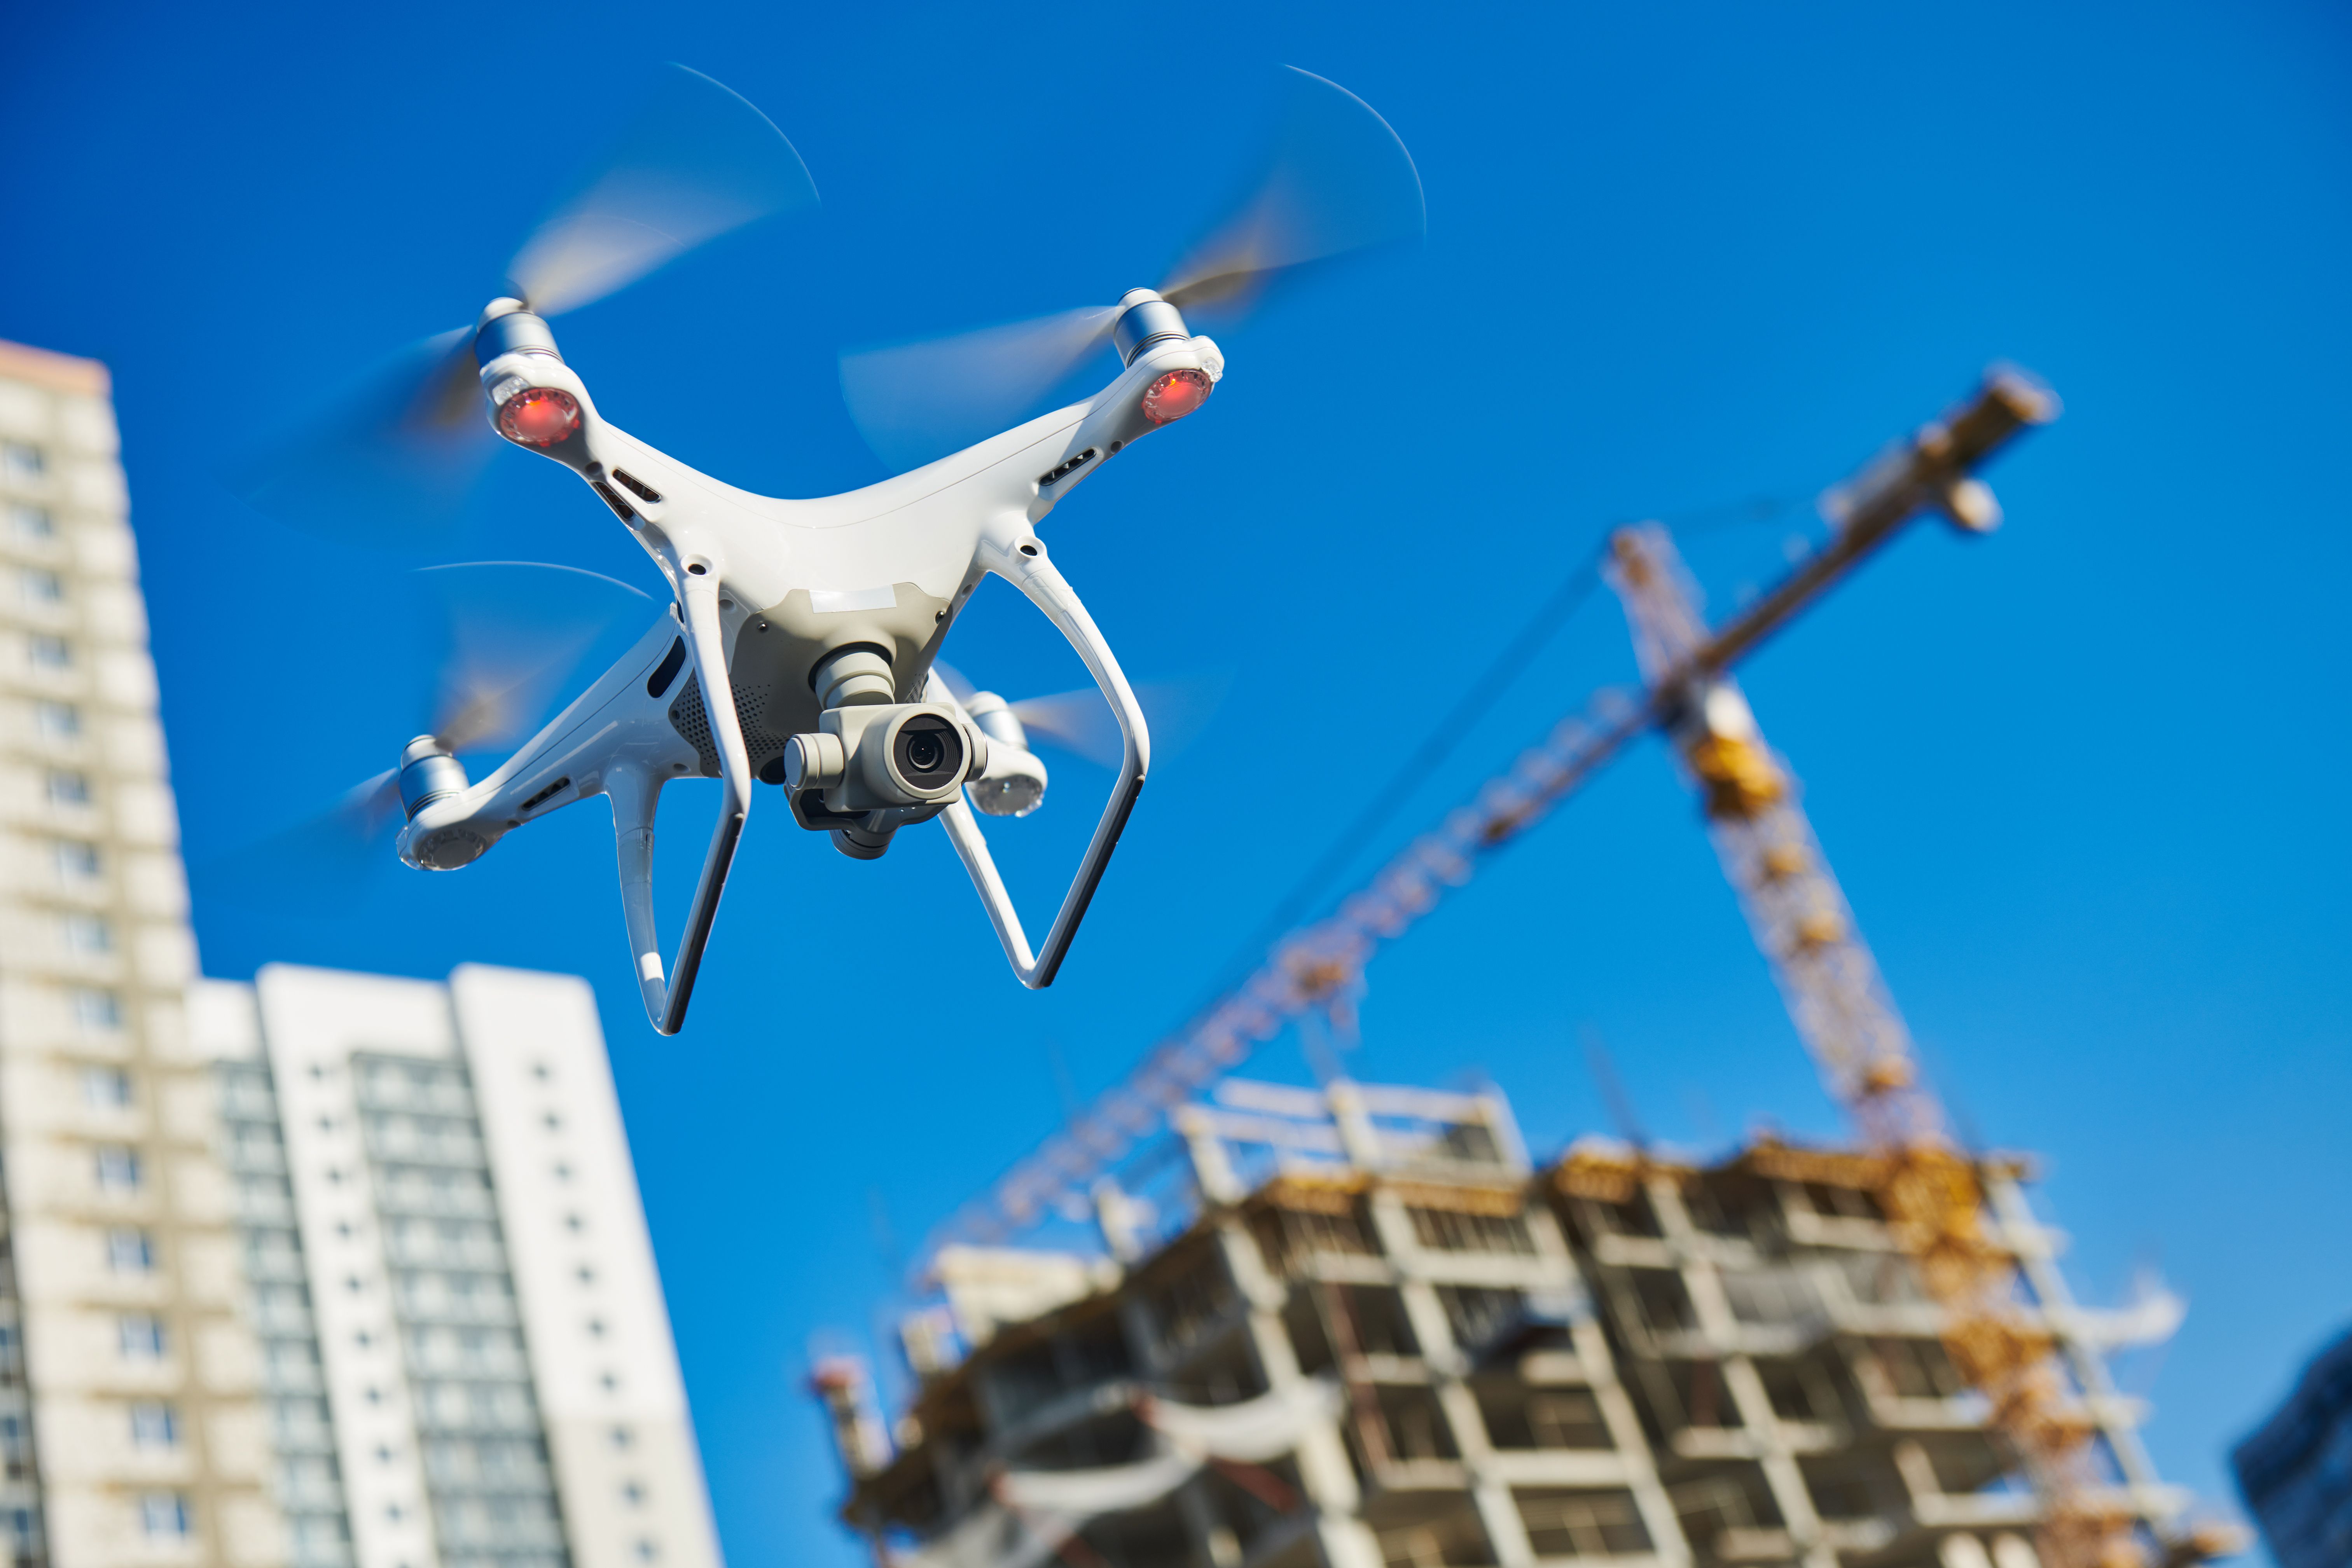 Autonous drone flying near a building being constructed